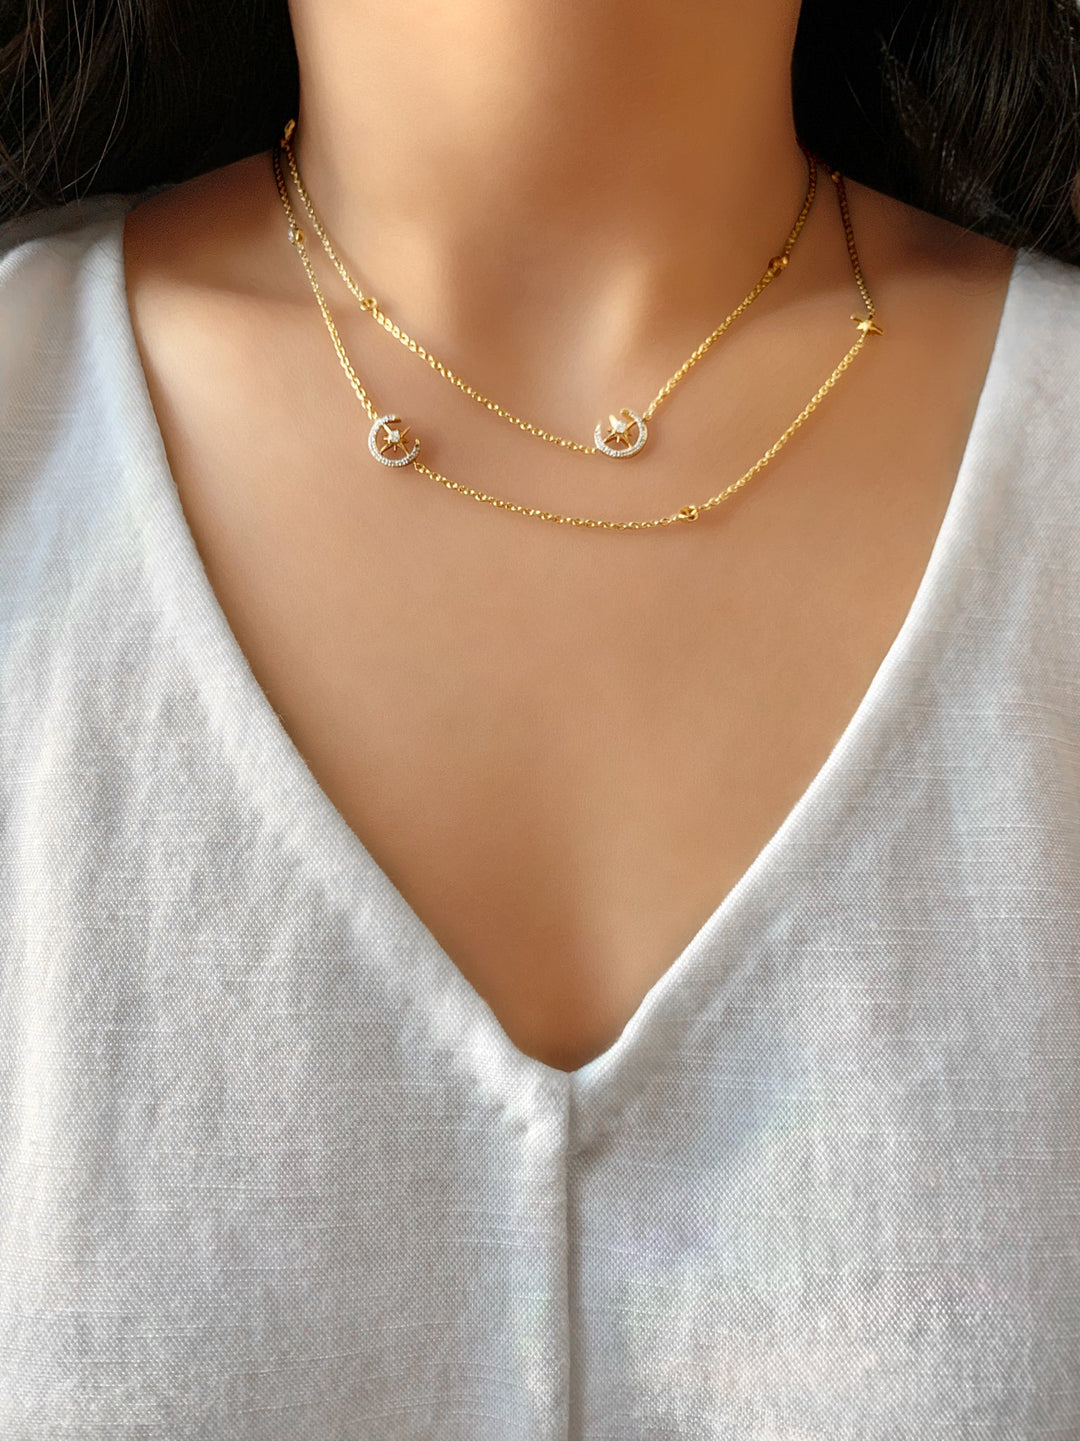 North Star Crescent Layered Diamond Necklace in 14K Yellow Gold Vermeil on Sterling Silver